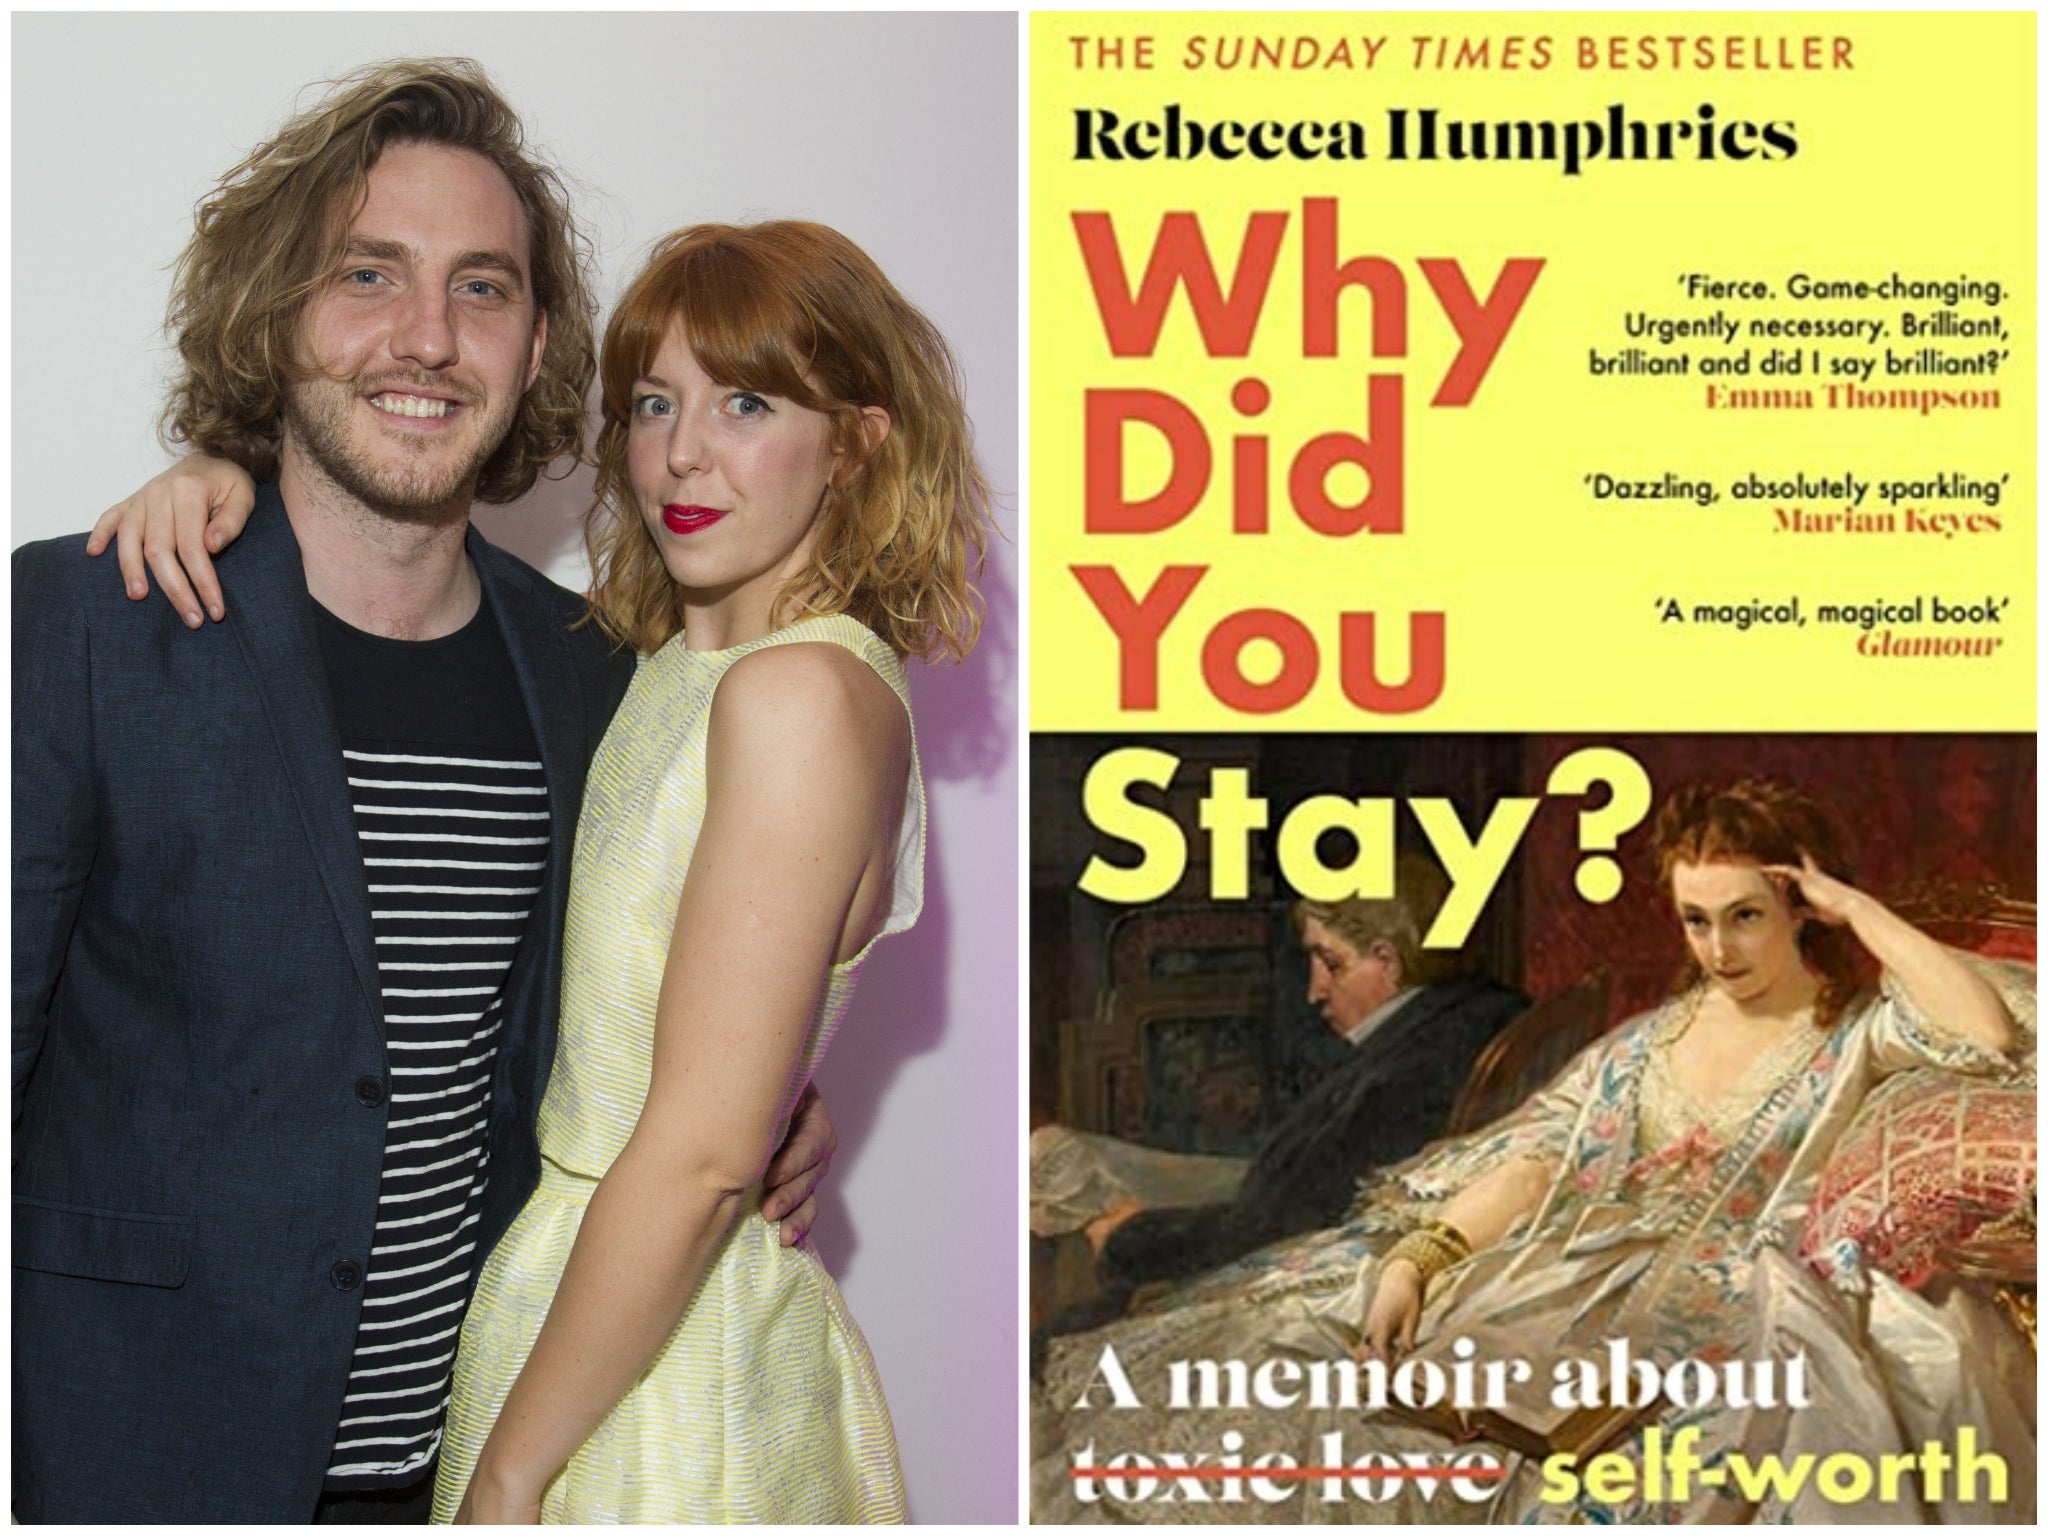 Seann Walsh and Rebecca Humphries, and her book ‘Why Did You Stay?’